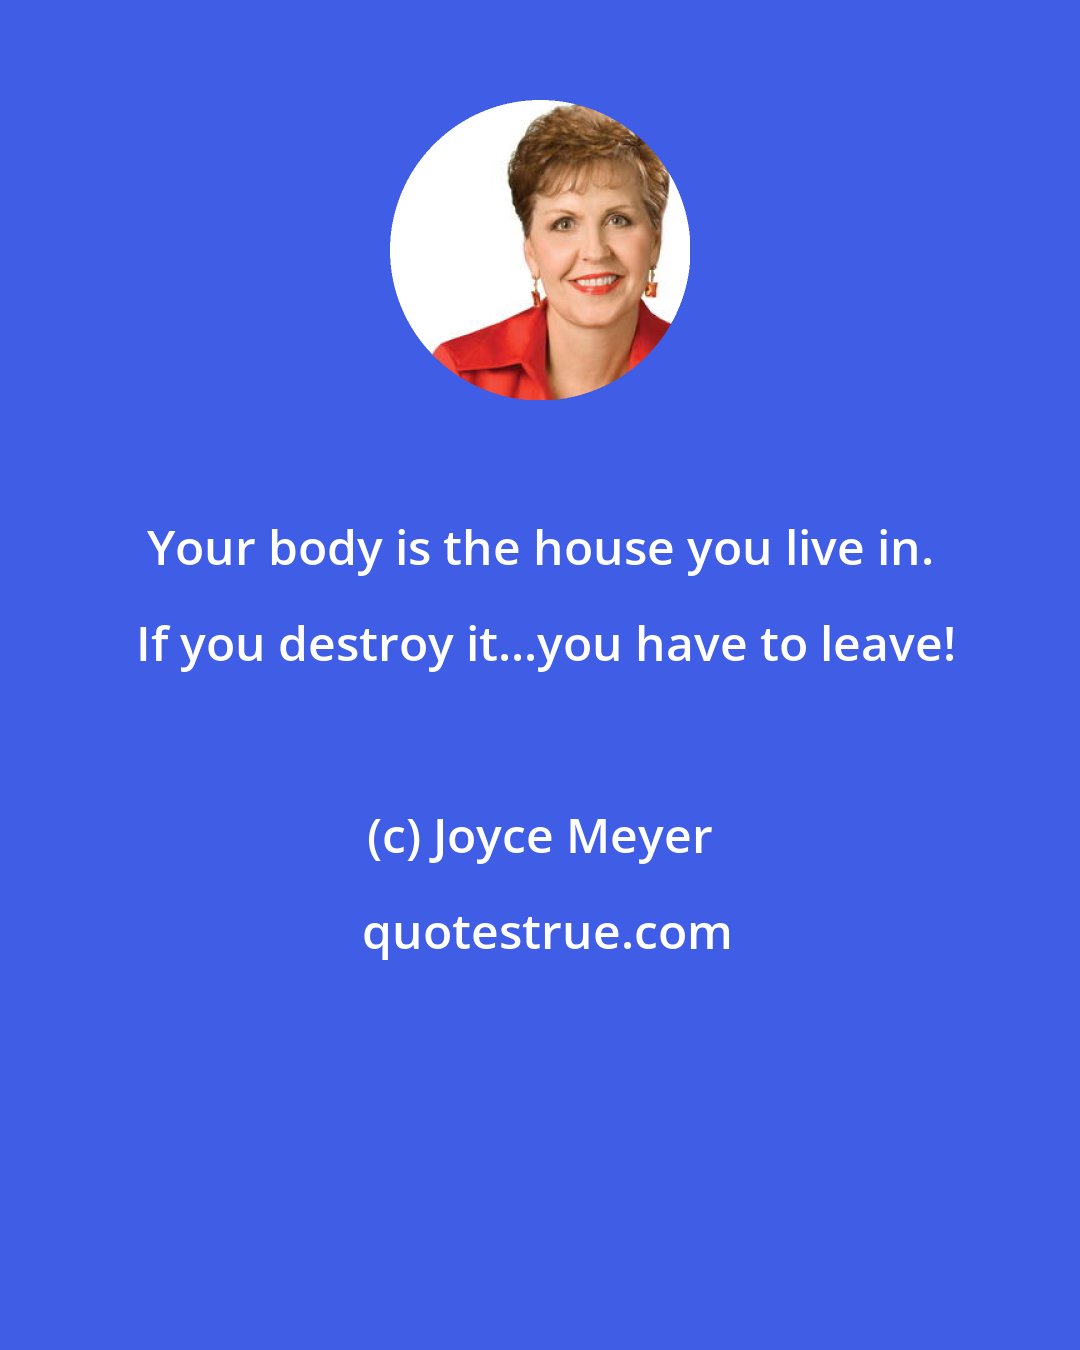 Joyce Meyer: Your body is the house you live in.  If you destroy it...you have to leave!